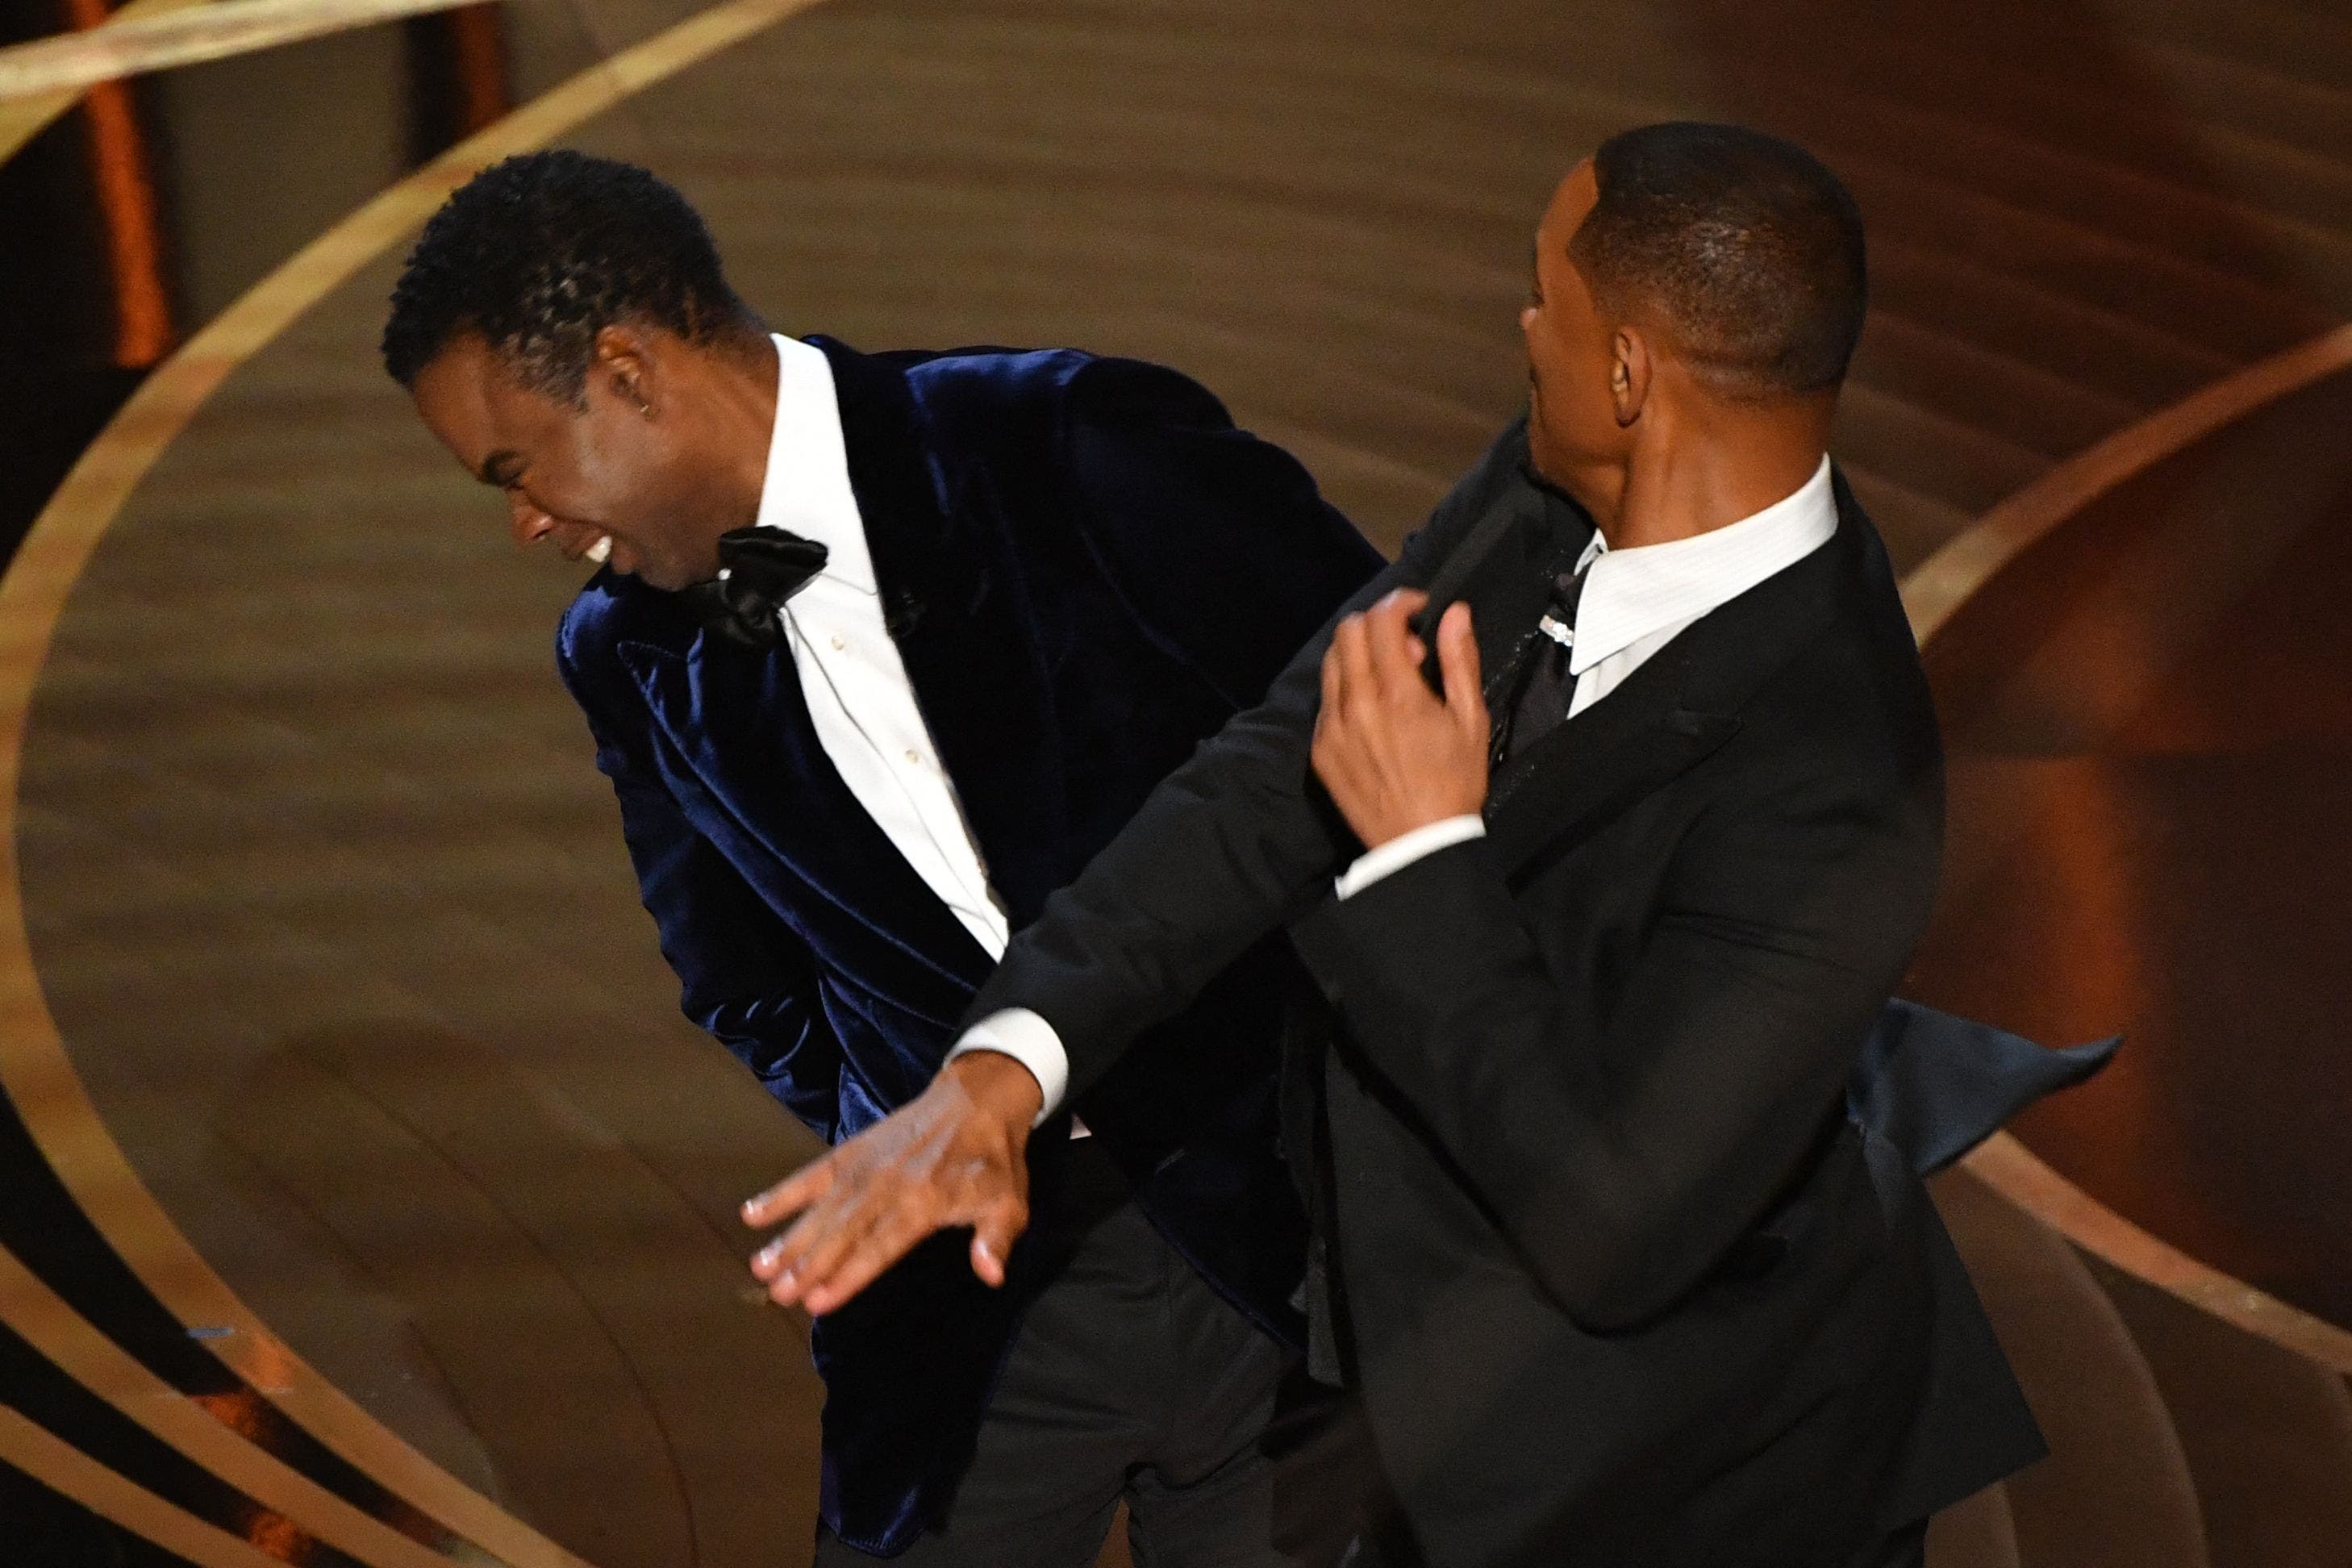 Chris Rock under pressure to 'overdeliver' in upcoming special after waiting year to address Will Smith slap